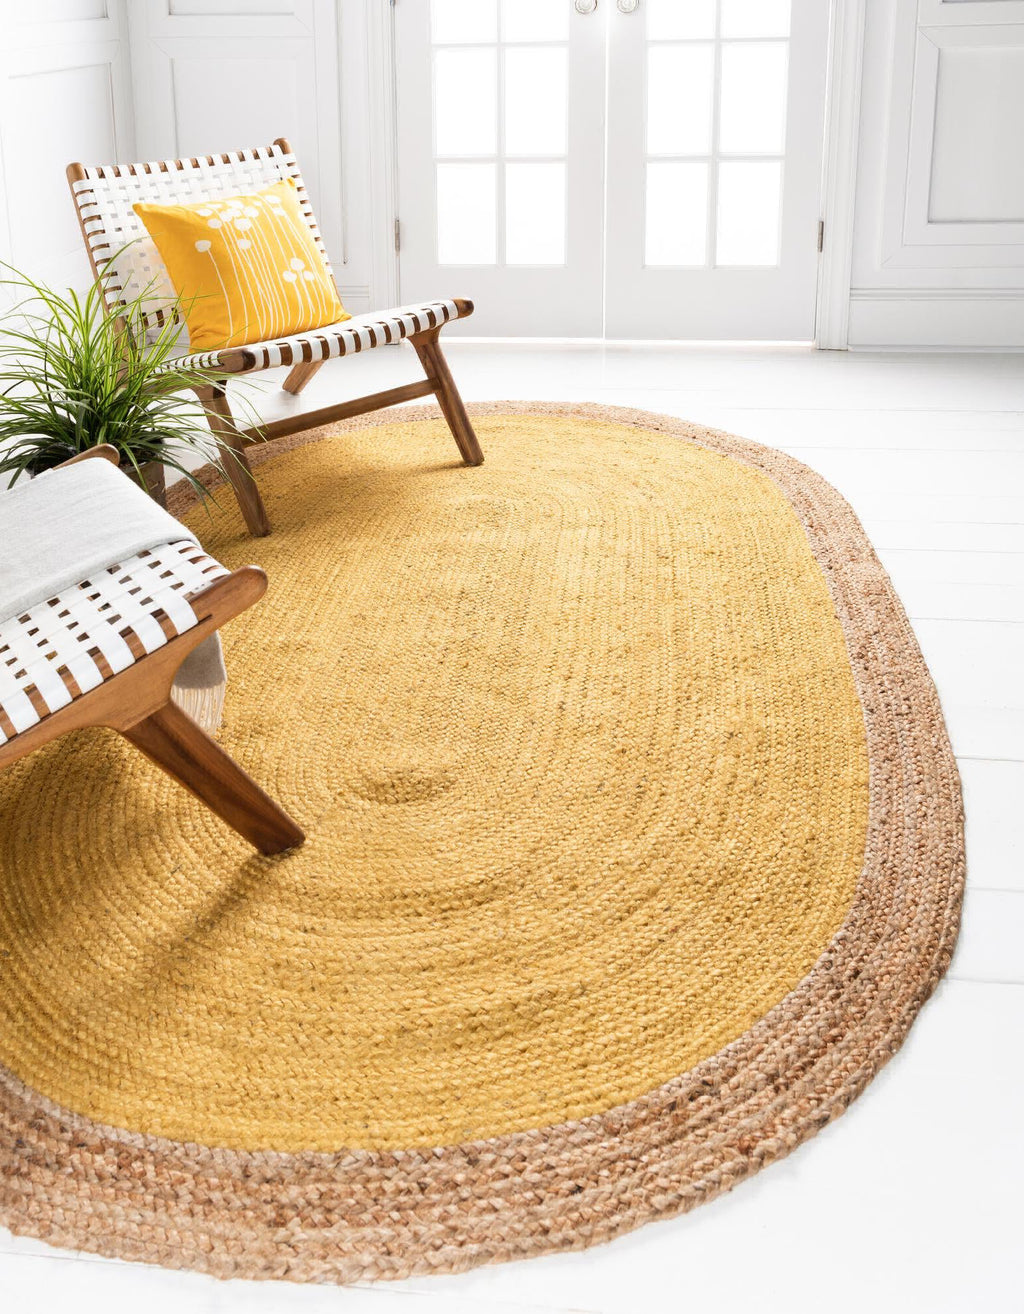 Unique Loom Braided Jute MGN-4 Yellow Area Rug Oval Lifestyle Image Feature